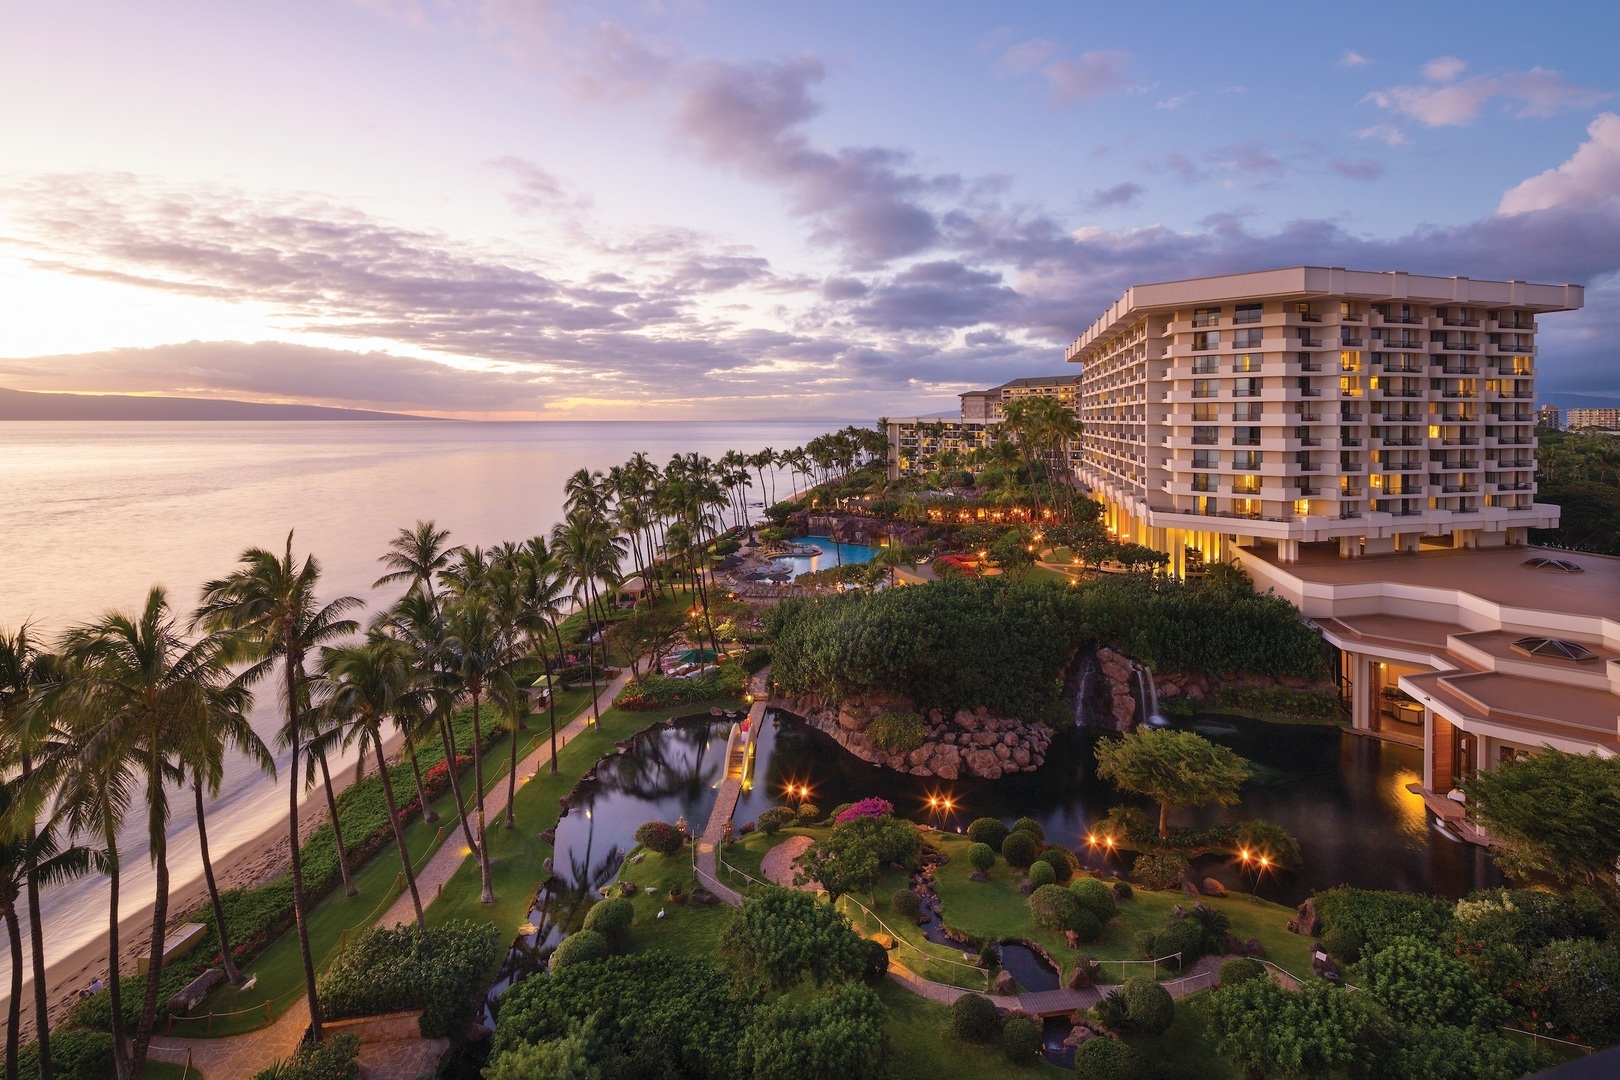 36th Annual Selected Topics in Internal Medicine, Lahaina, Hawaii, United States